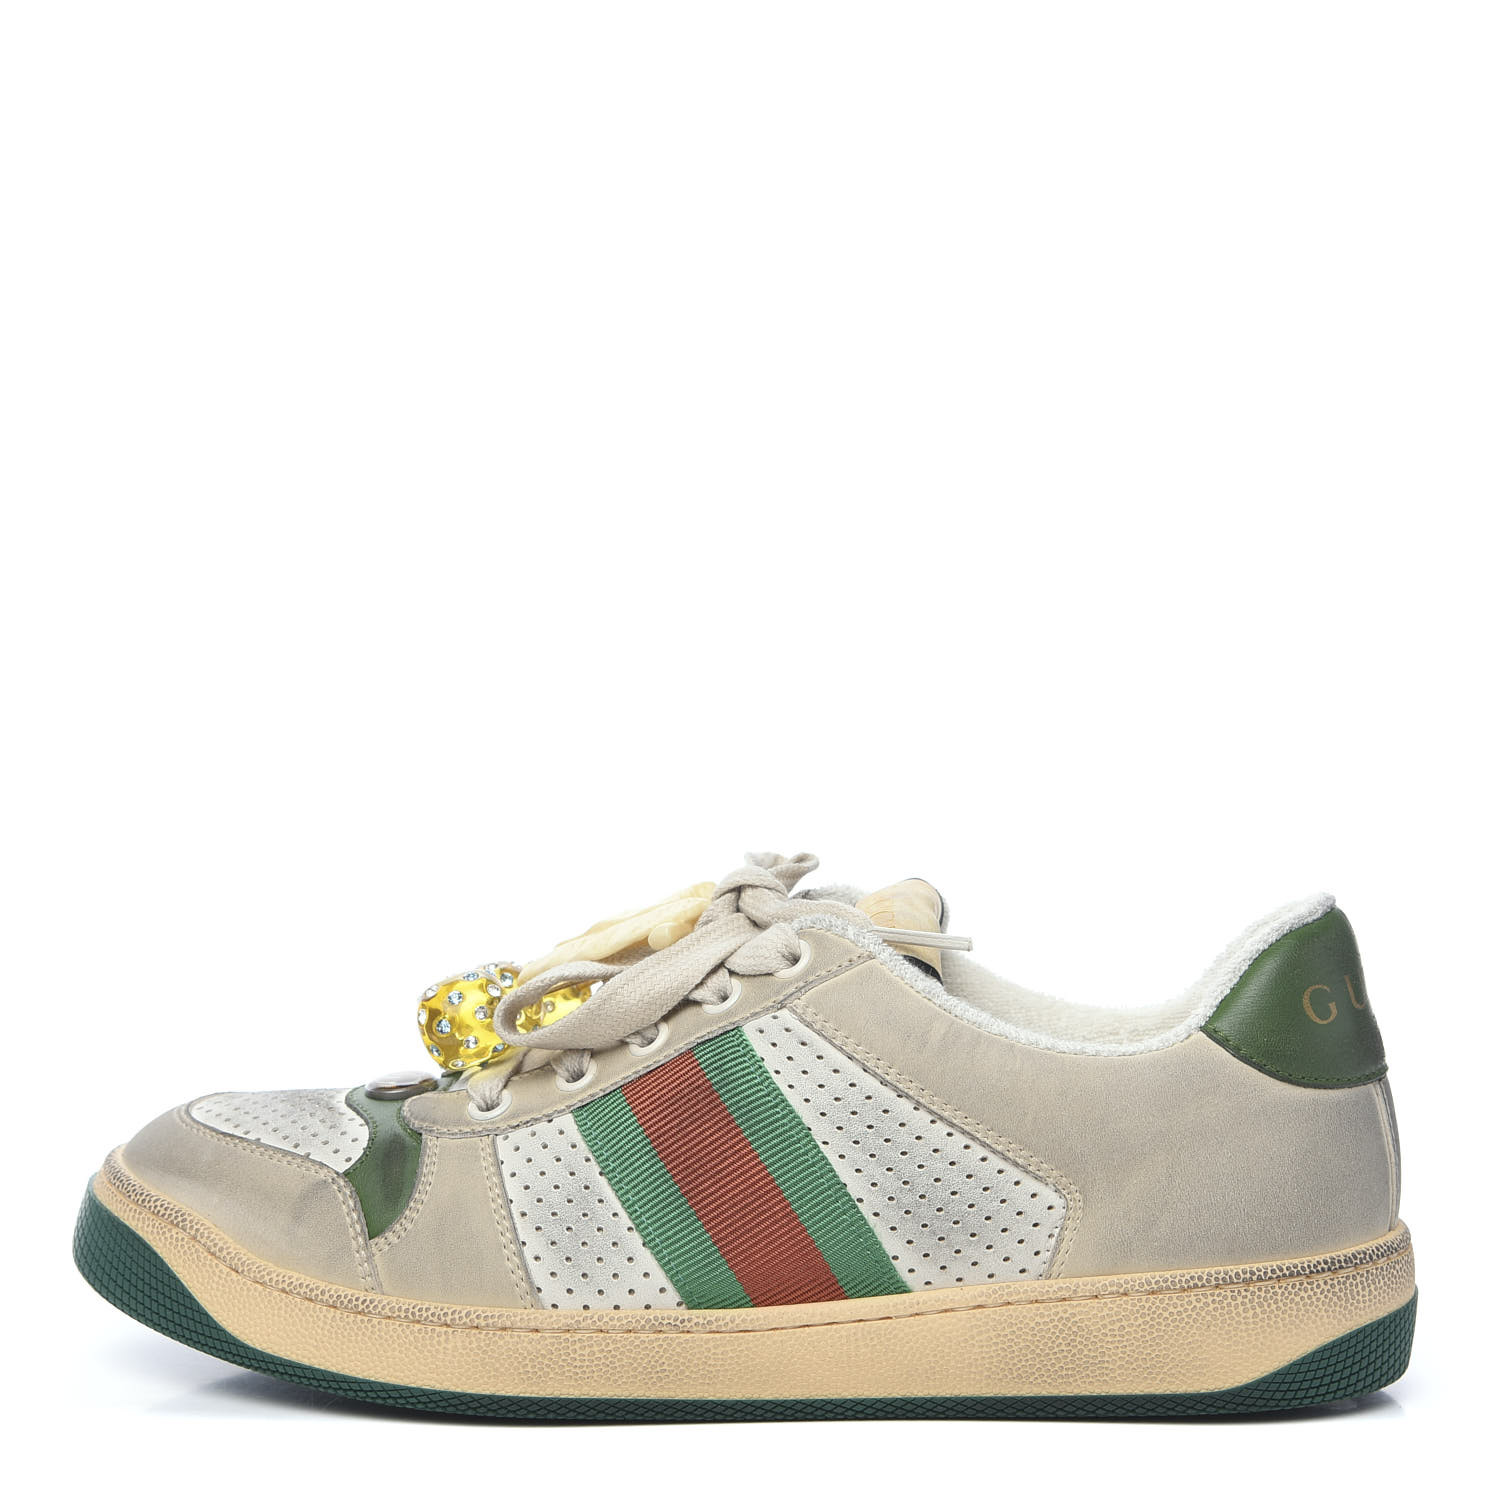 throwback gucci sneakers